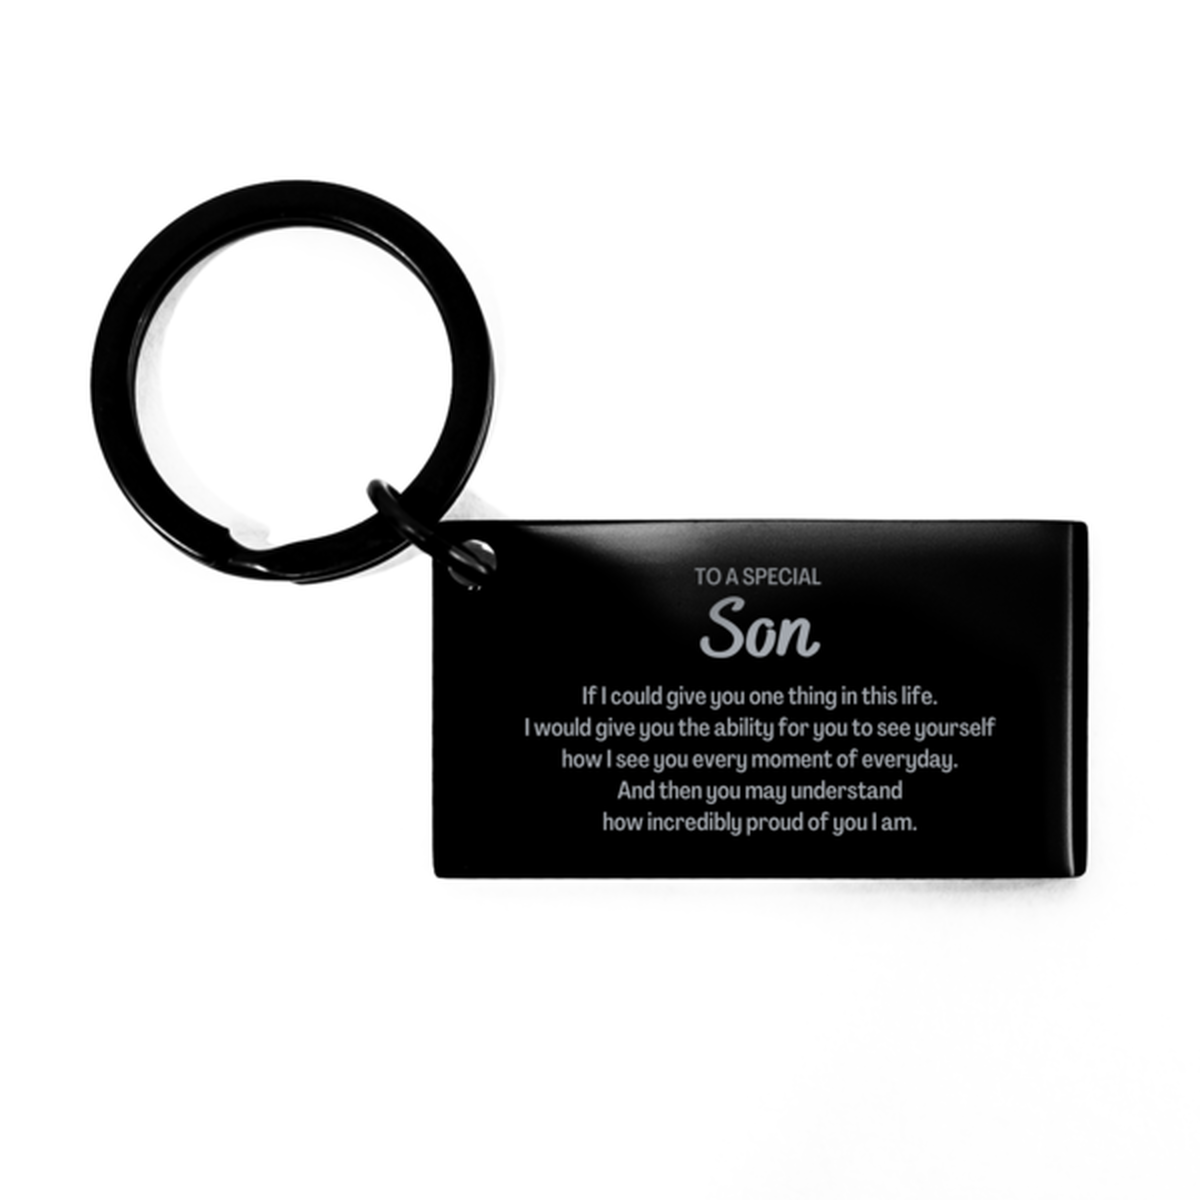 To My Son Keychain, Gifts For Son Engraved, Inspirational Gifts for Christmas Birthday, Epic Gifts for Son To A Special Son how incredibly proud of you I am